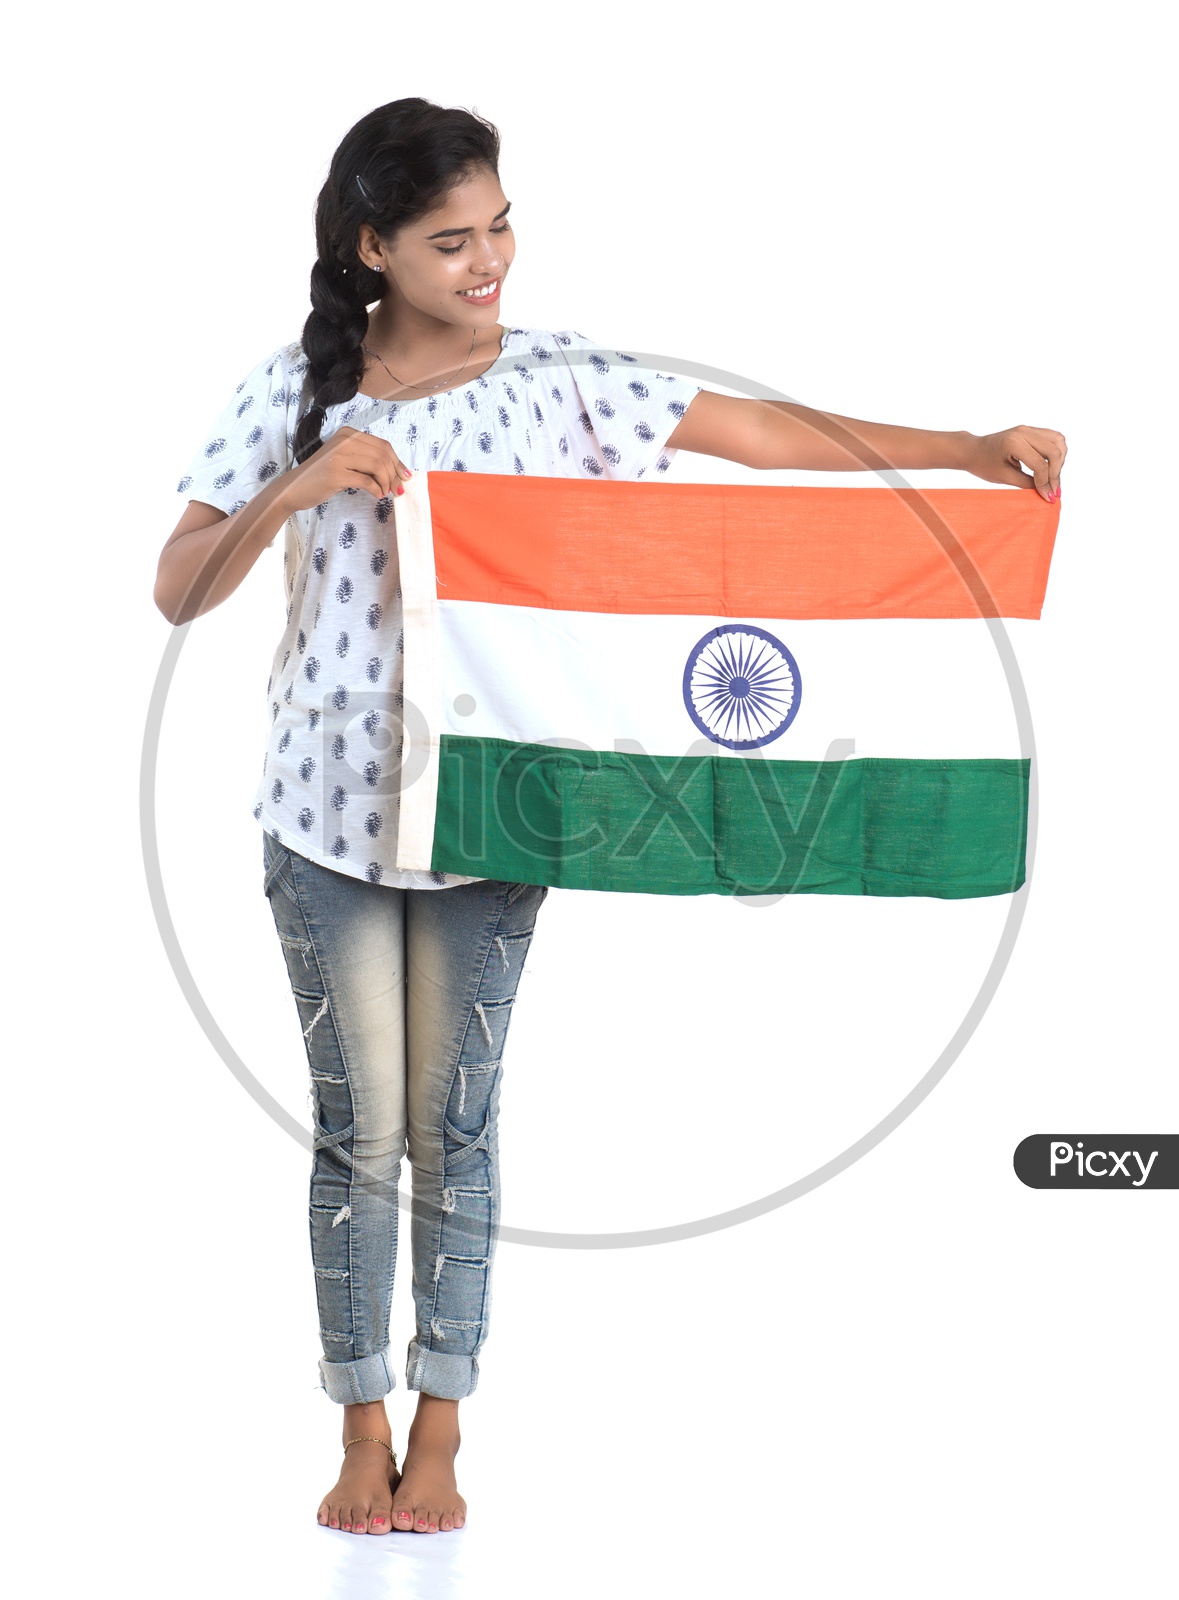 Young Indian Girl Holding Indian National Flag On Hand standing and Posing Over a White background